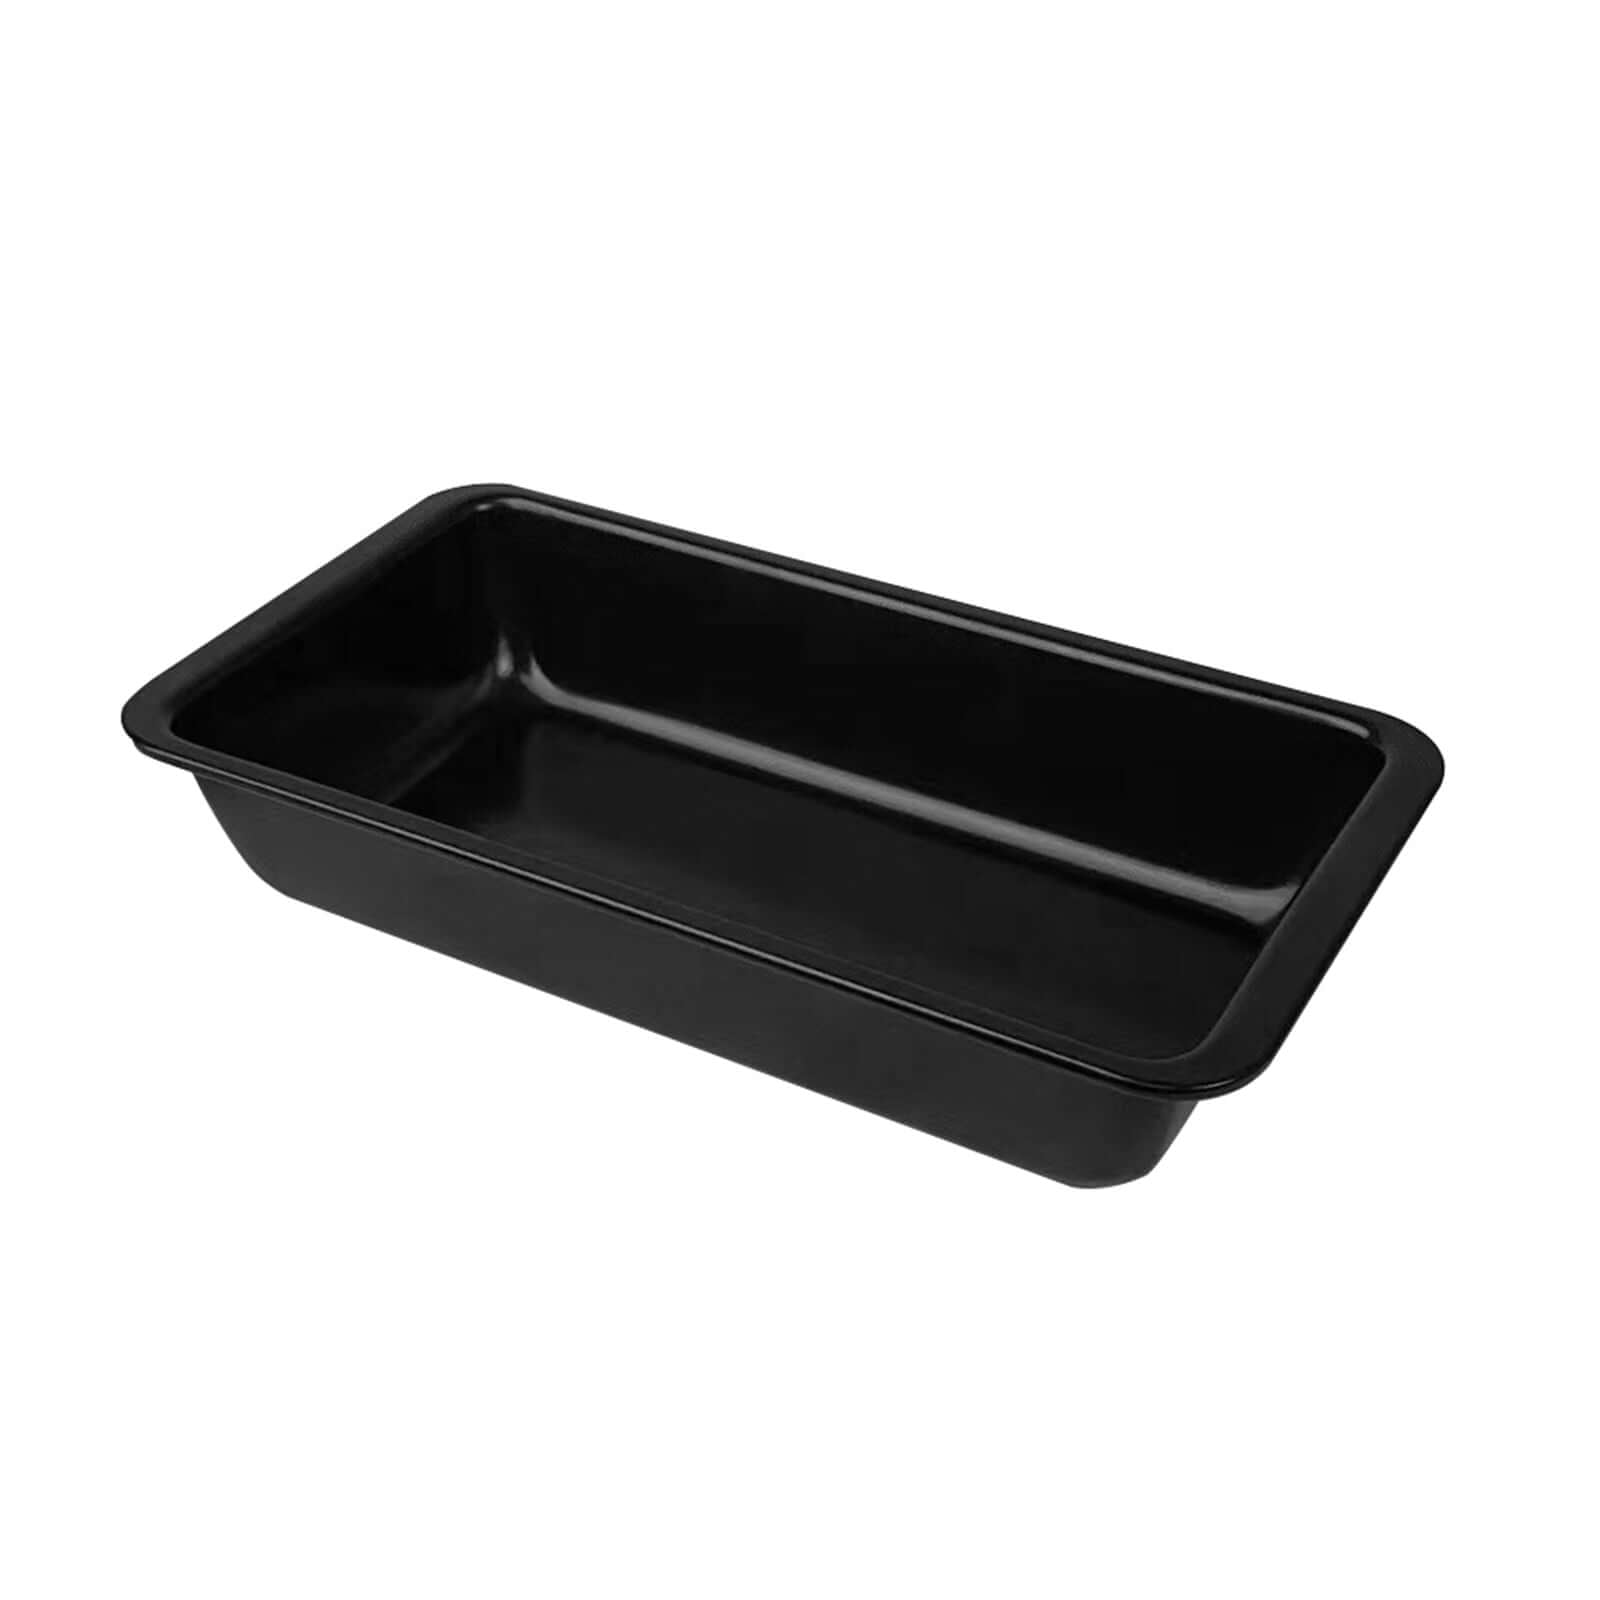 HYSapientia 9 inch Carbon Steel Loaf Tin